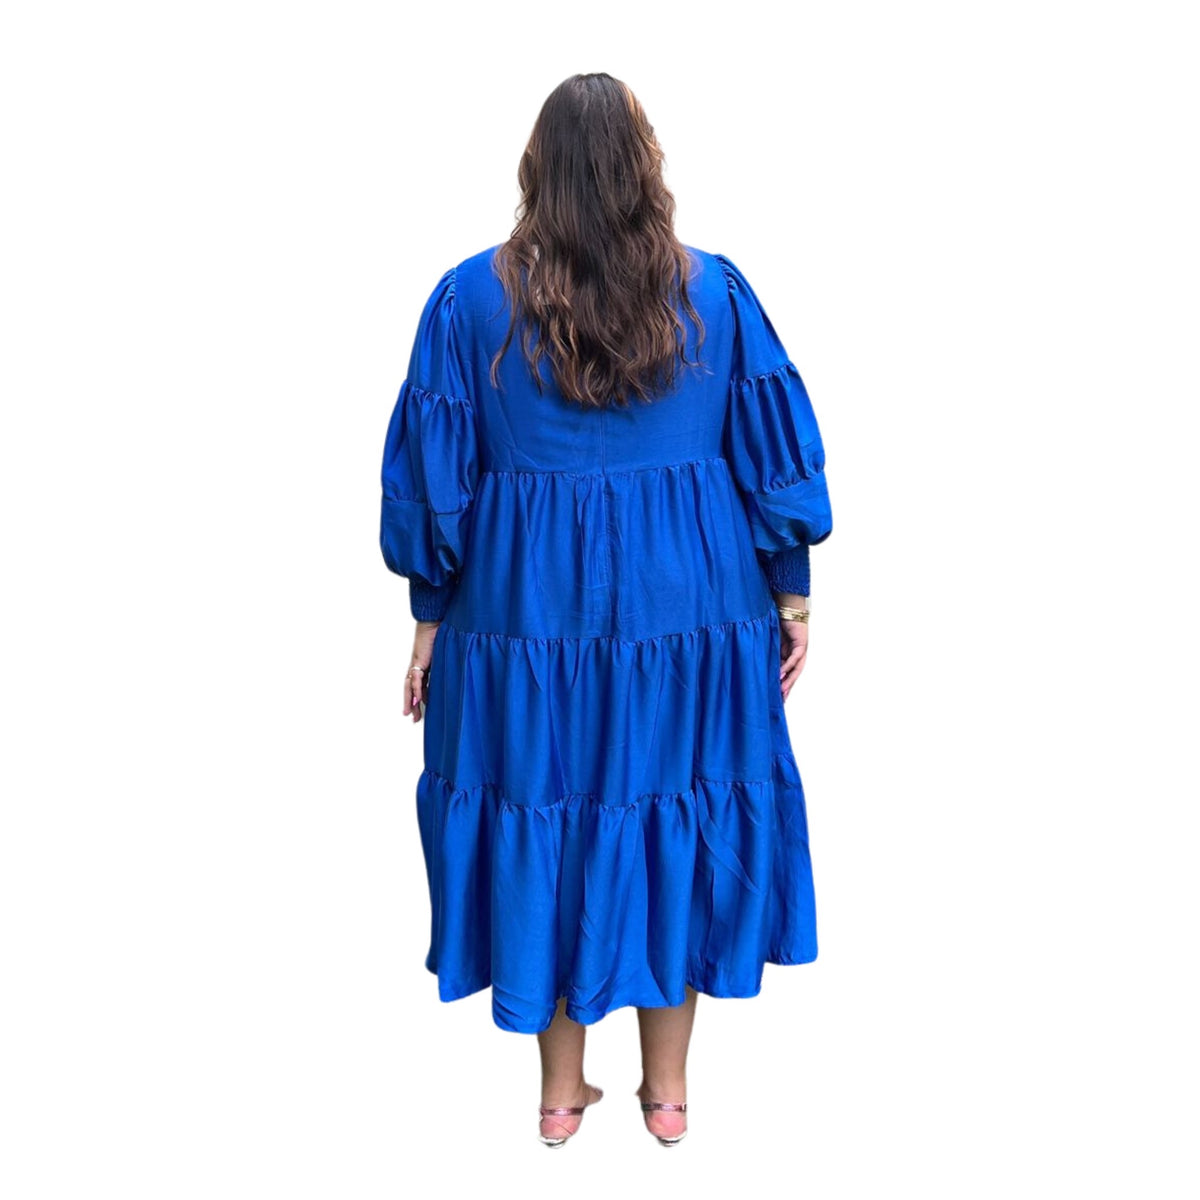 Swuun Sapphire Blue Ethereal Dress